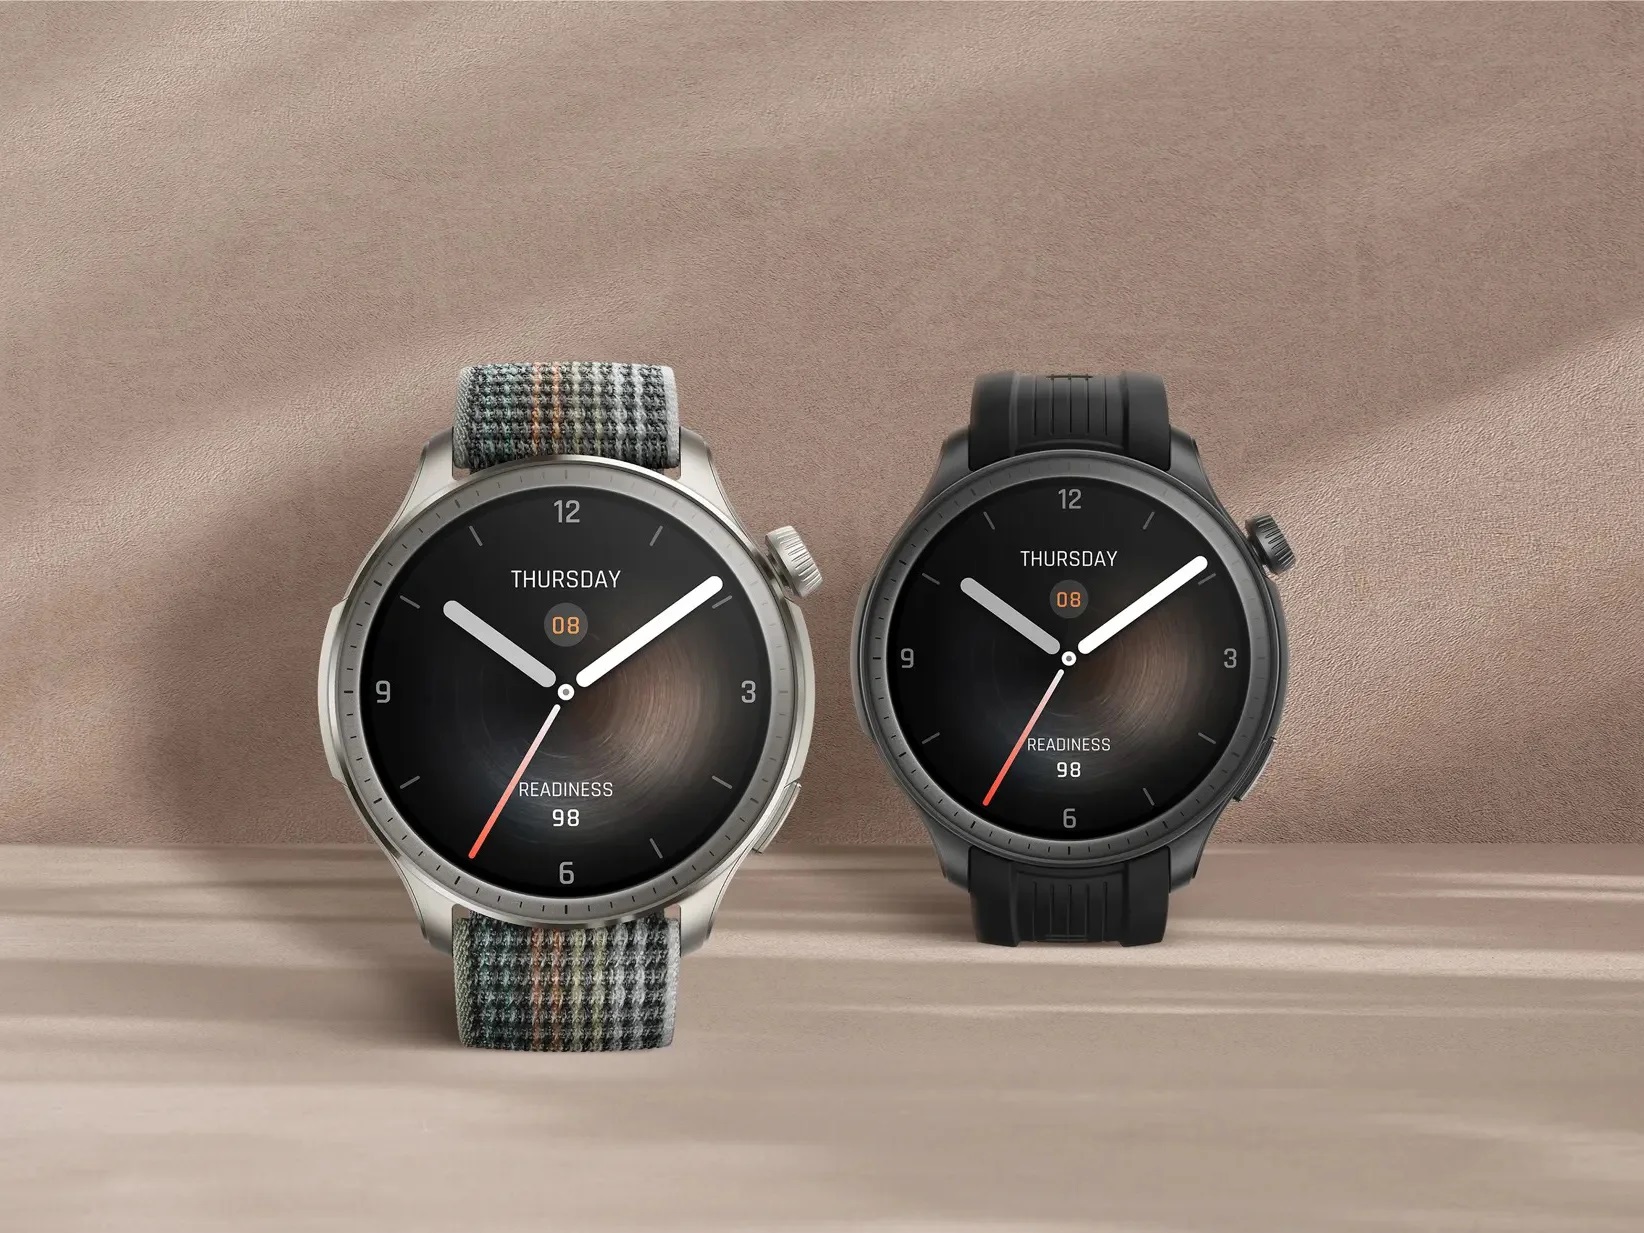 Amazfit begins testing a blood pressure measurement feature on its smartwatch